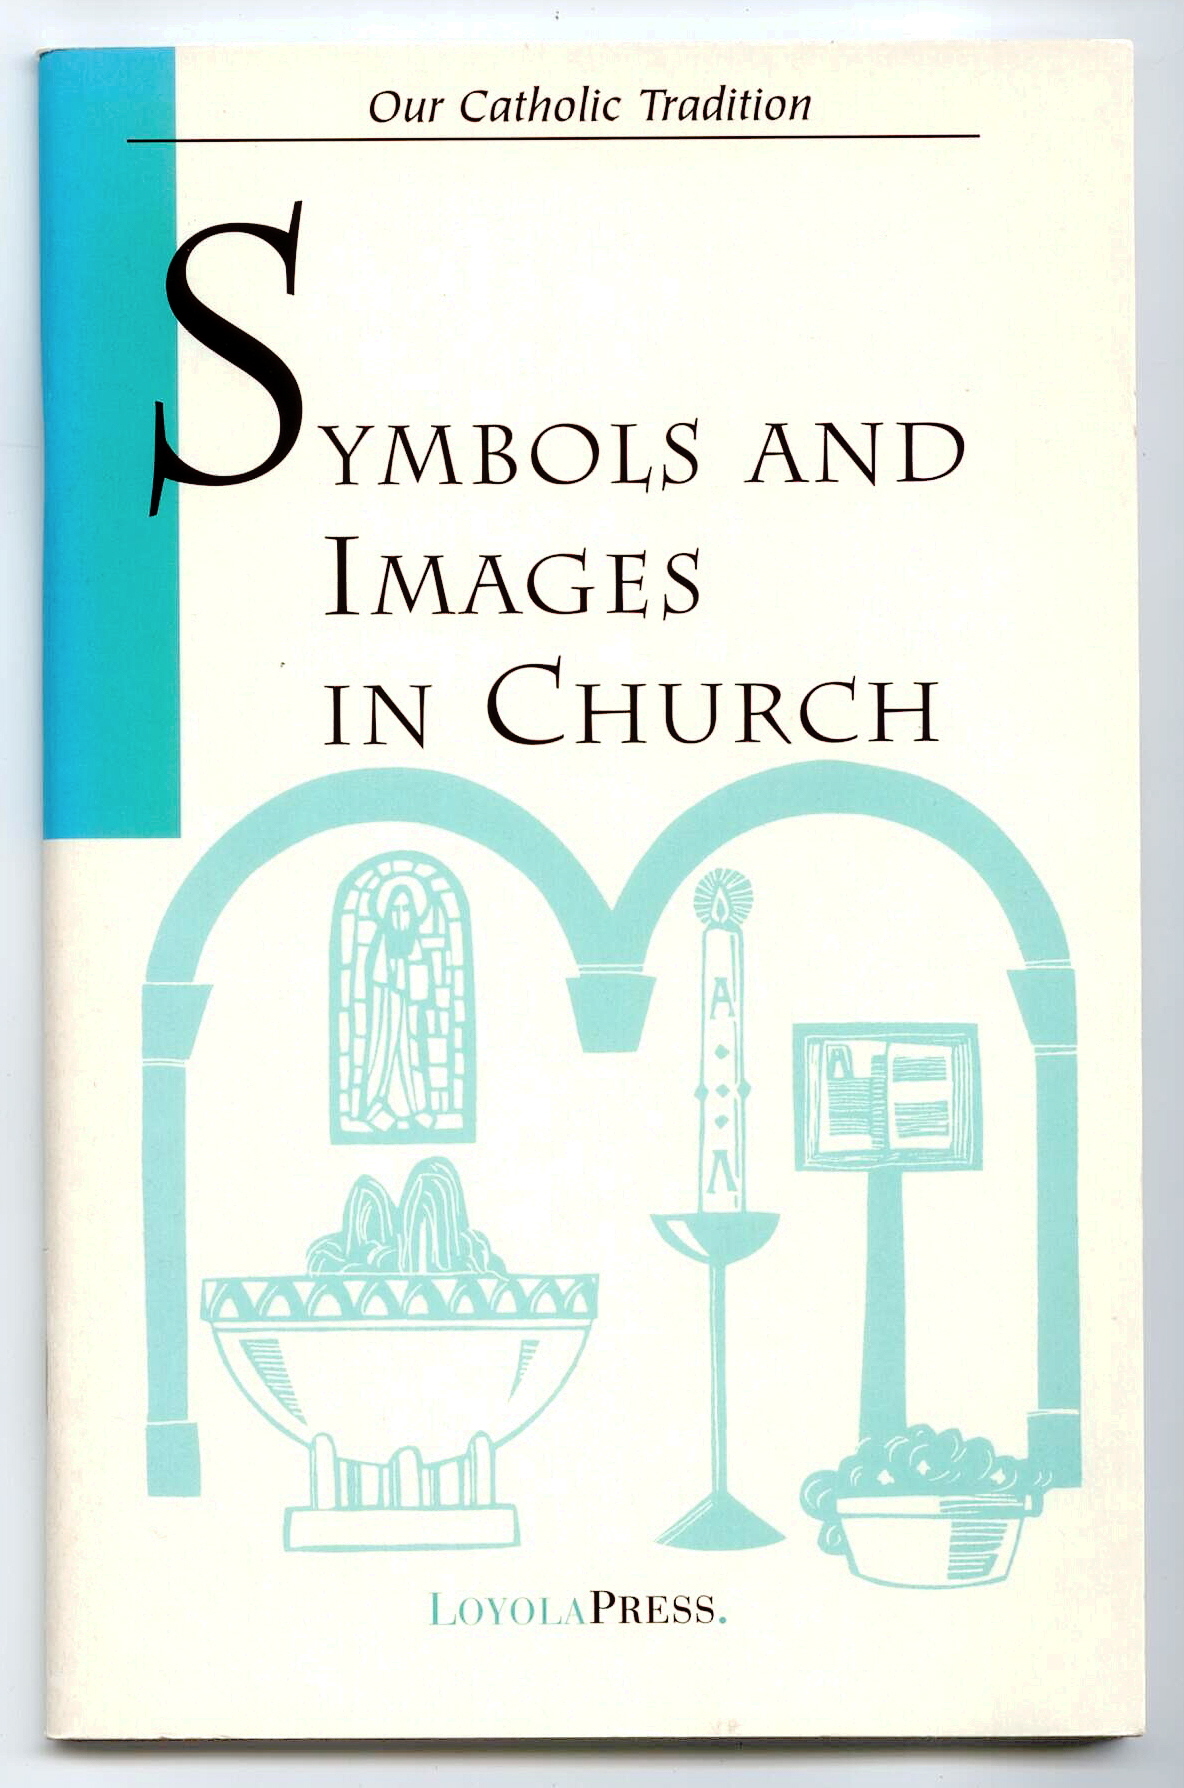 Symbols And Images In Church by James E. Frazier